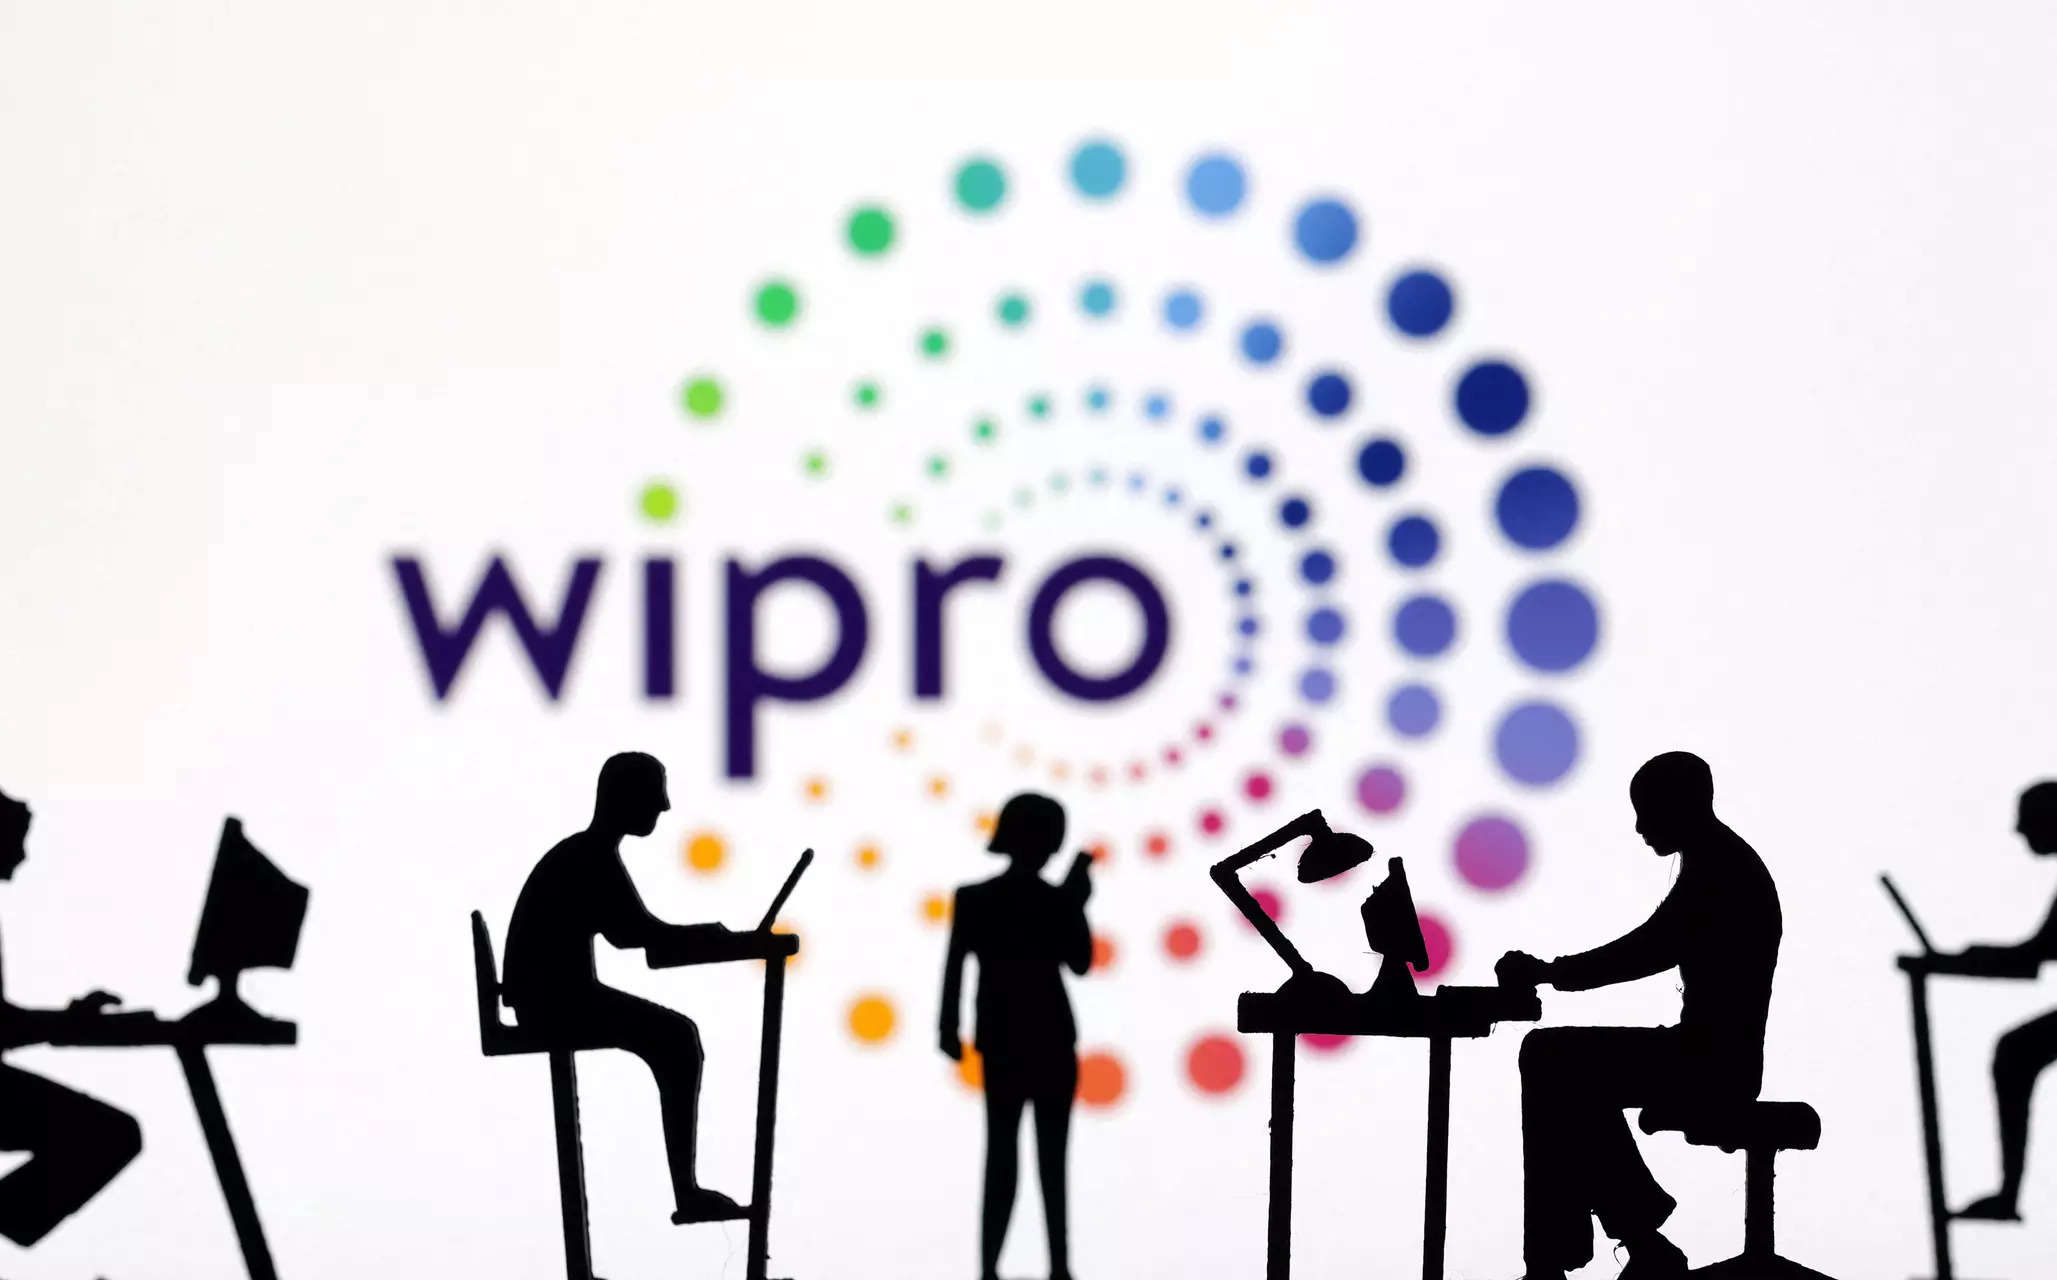 Stock Radar: Wipro hits fresh multi-year highs! Cup & Handle pattern breakout; time to buy? 